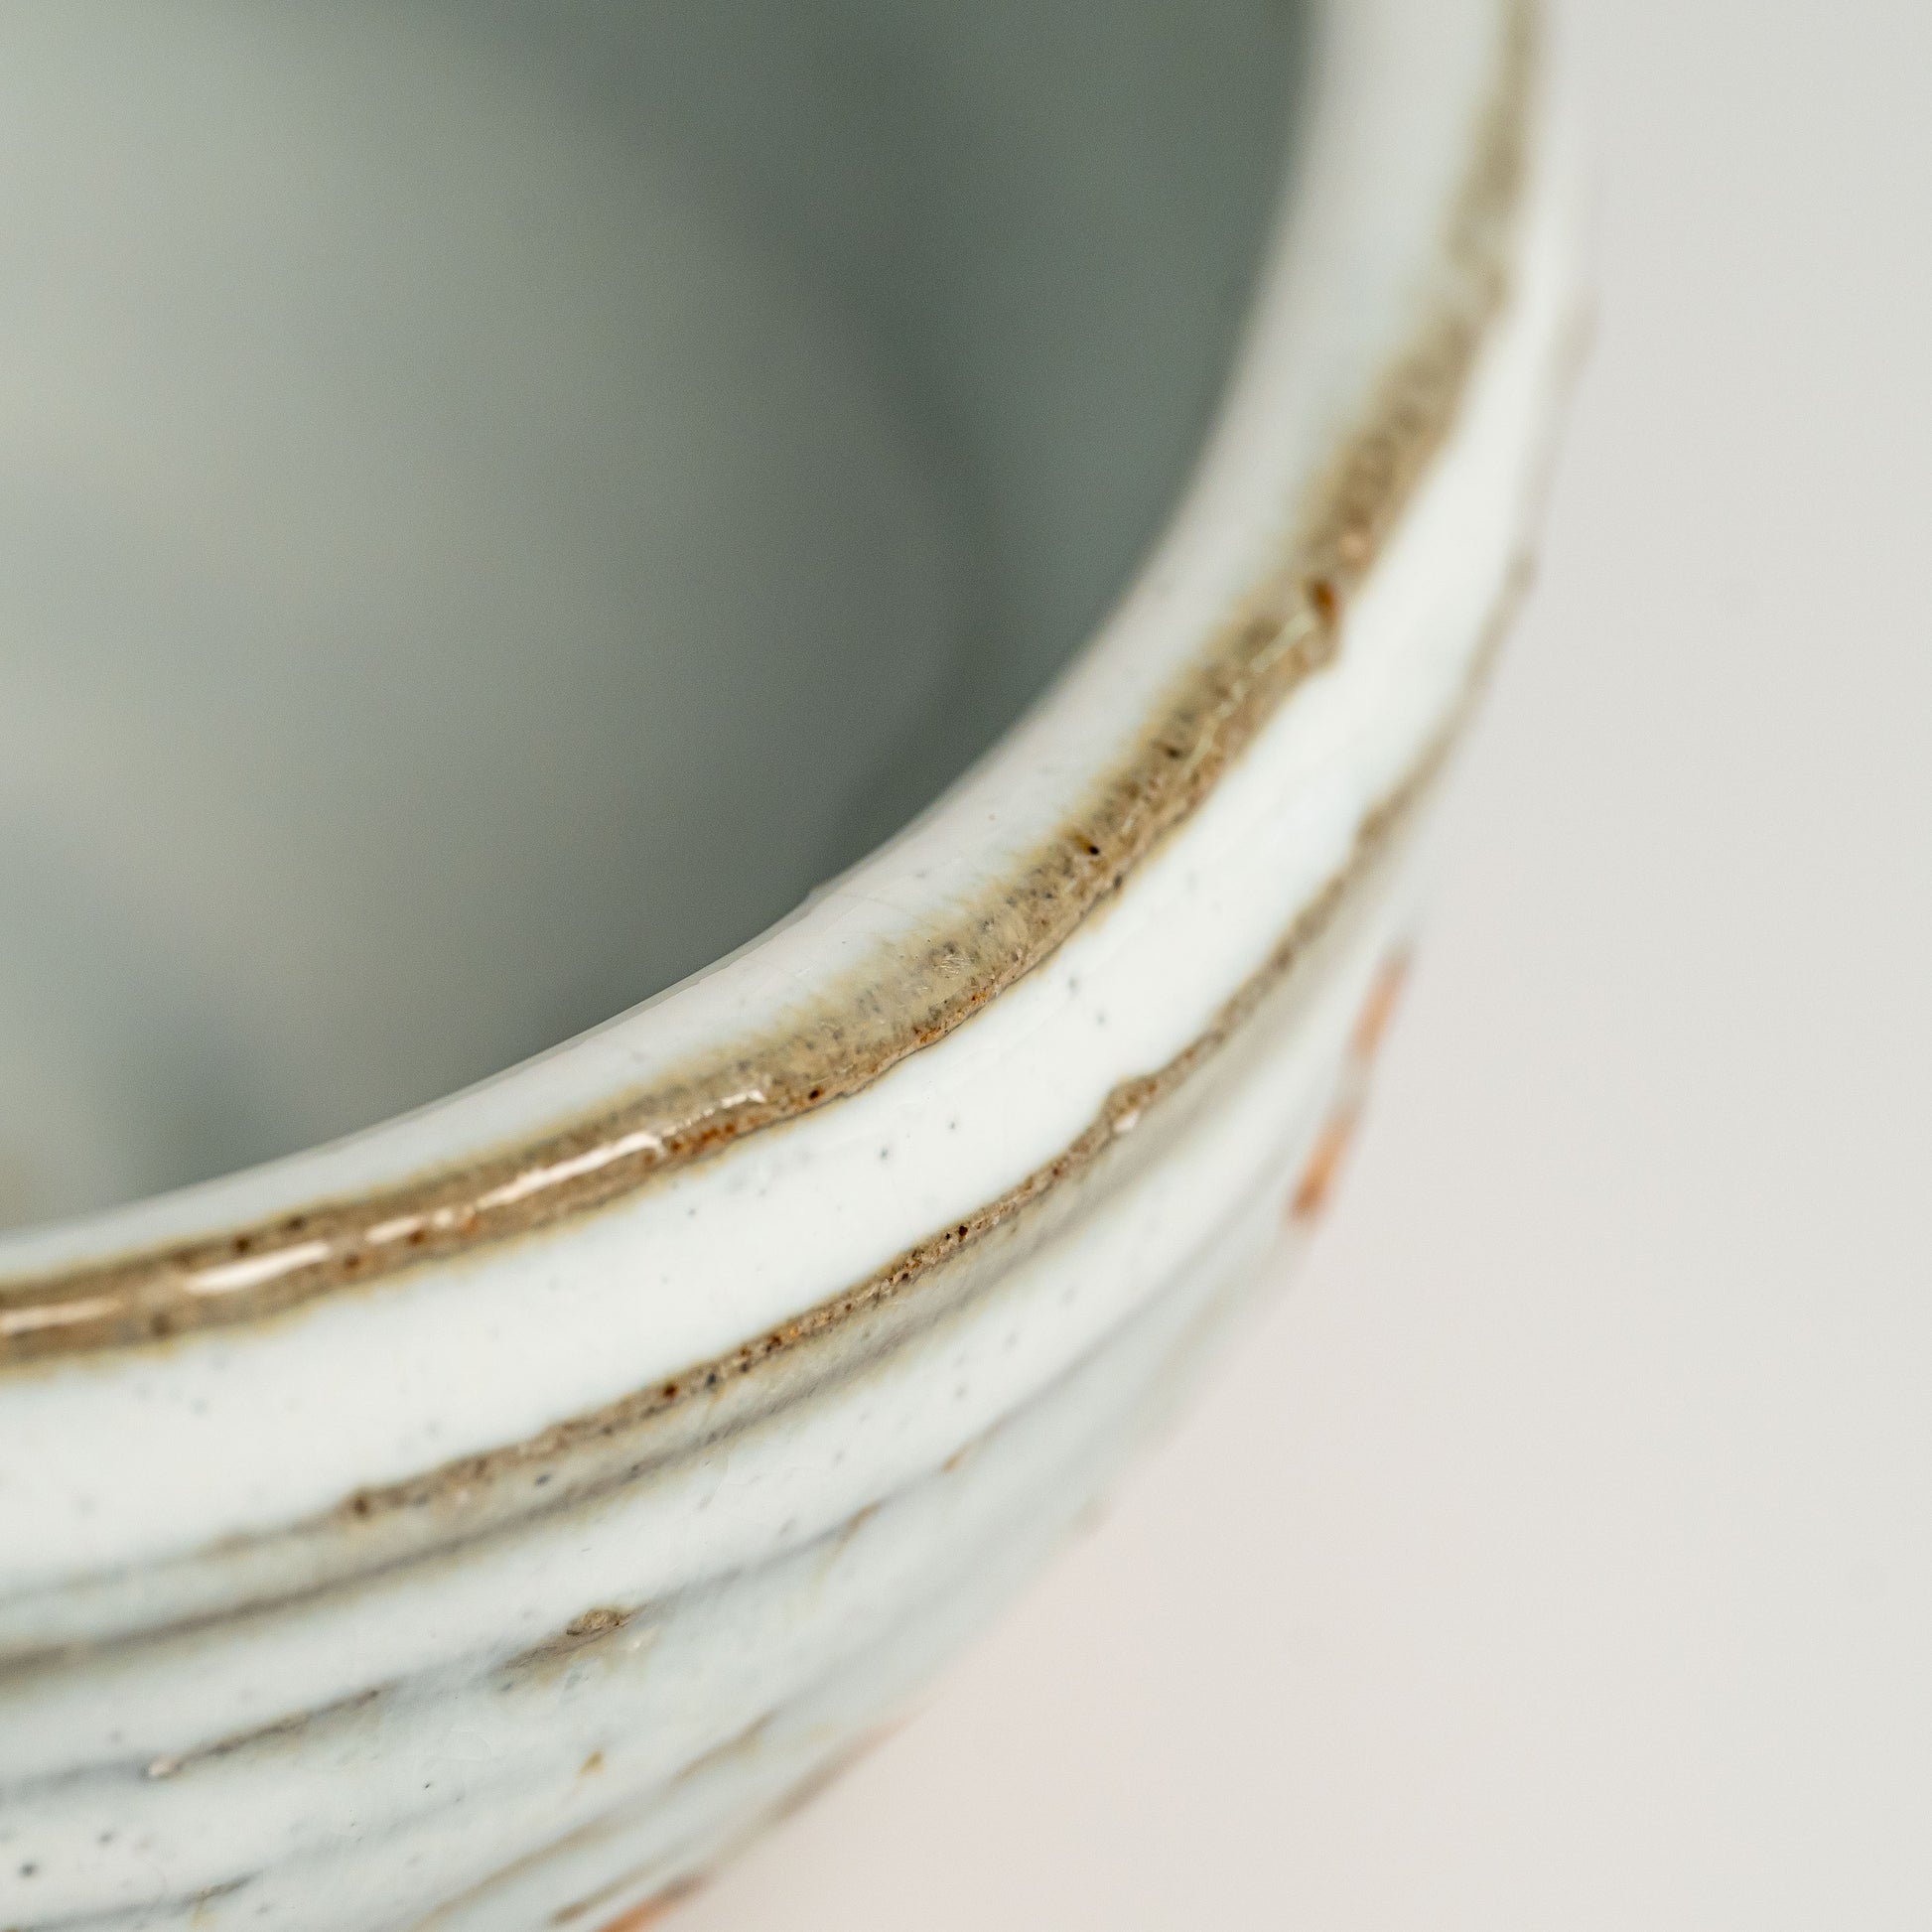 A close up of a white Hagi yaki bowl on a white background